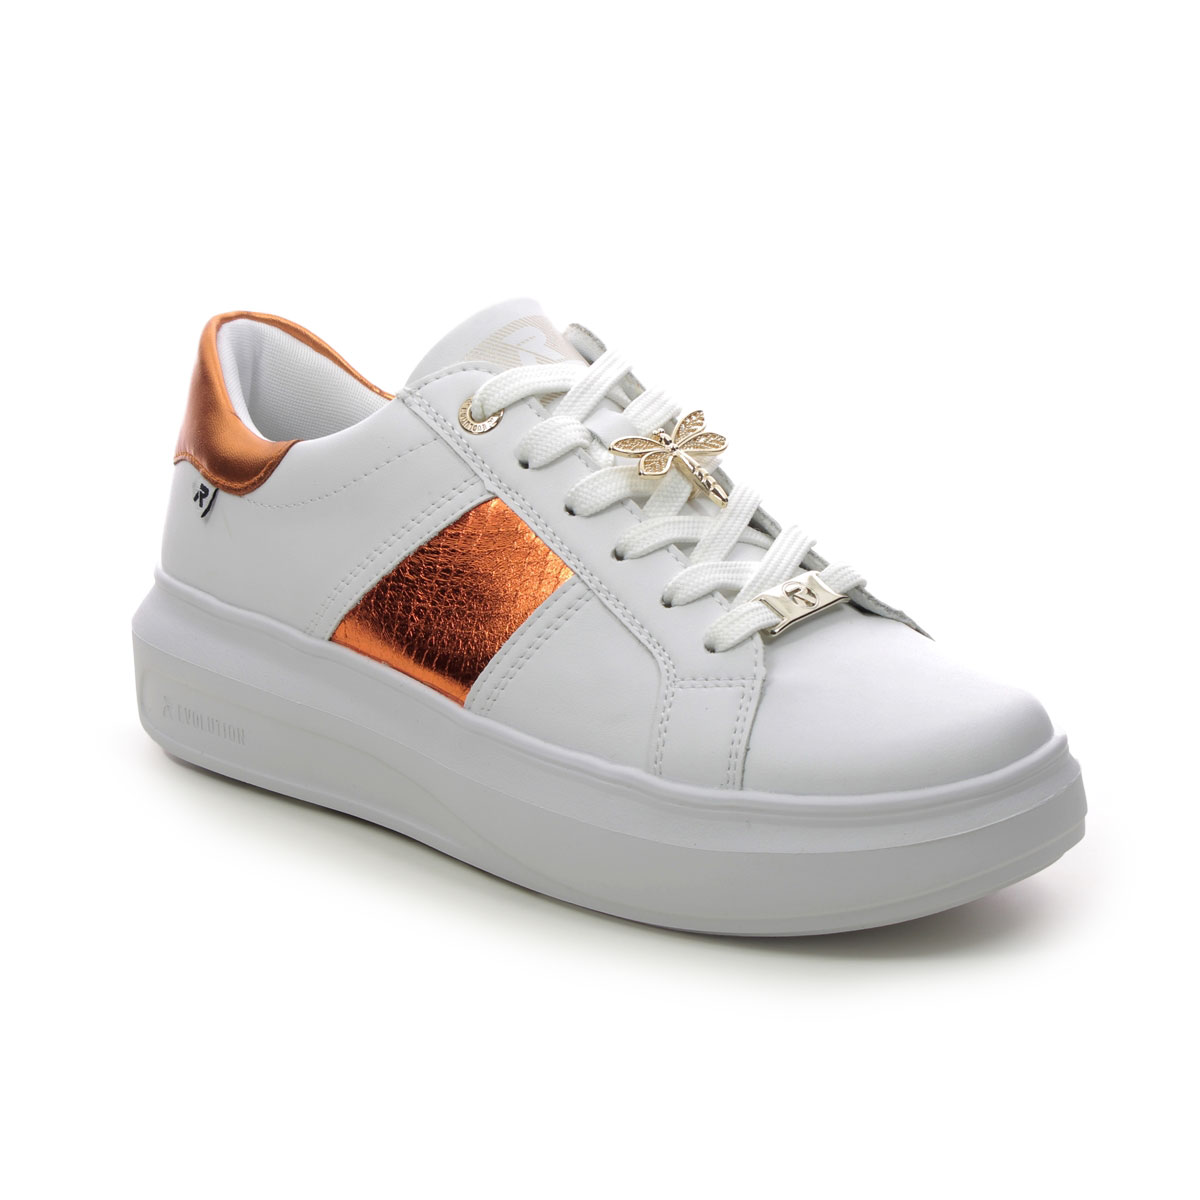 Rieker W1202-80 White Coral Womens trainers in a Plain Leather in Size 41